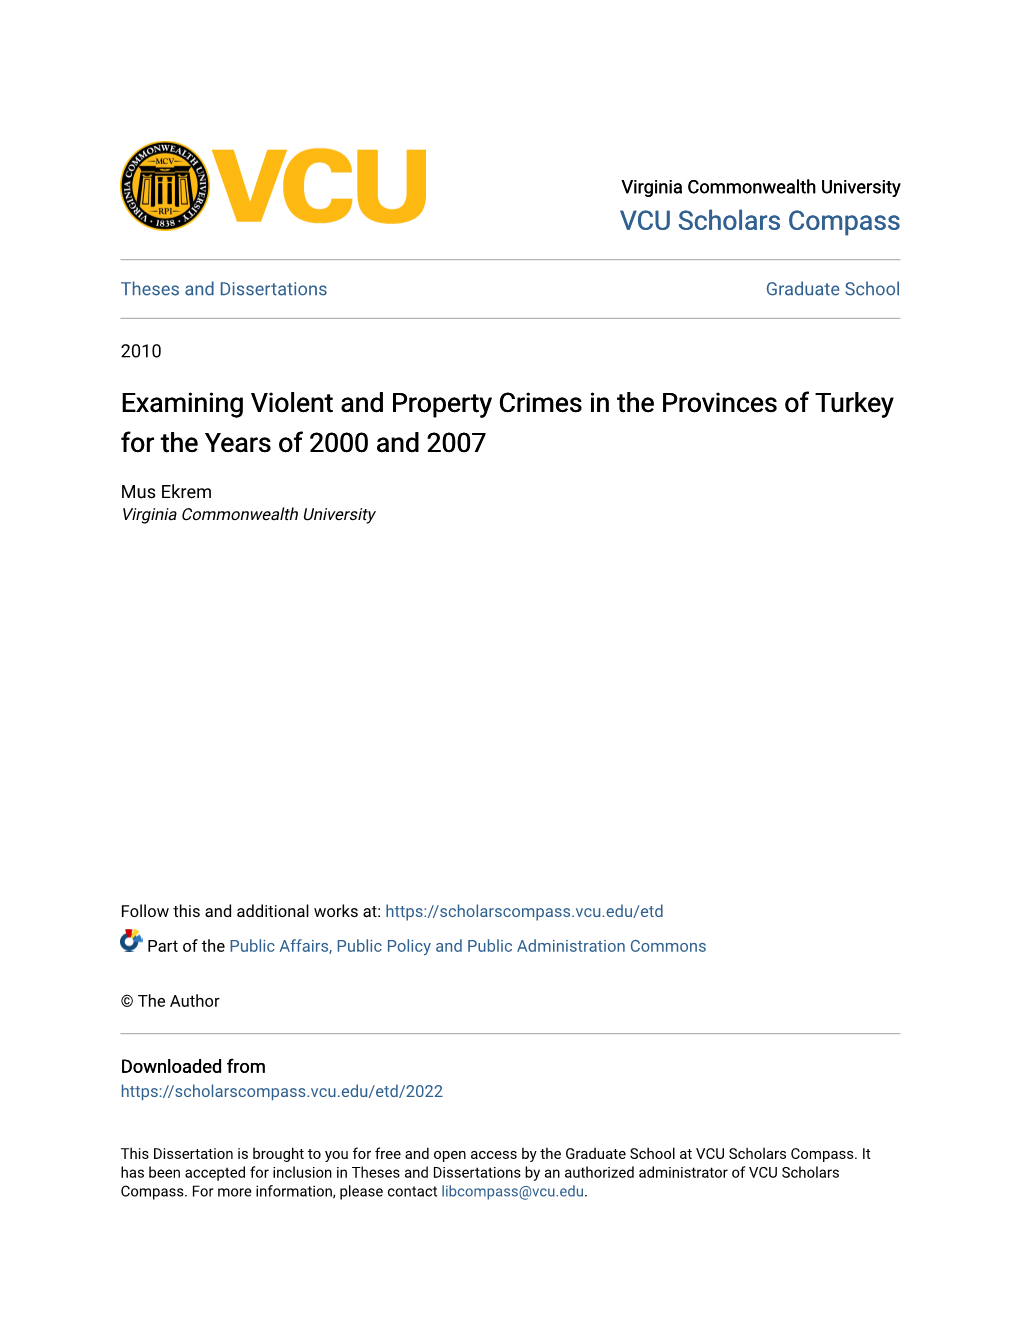 Examining Violent and Property Crimes in the Provinces of Turkey for the Years of 2000 and 2007